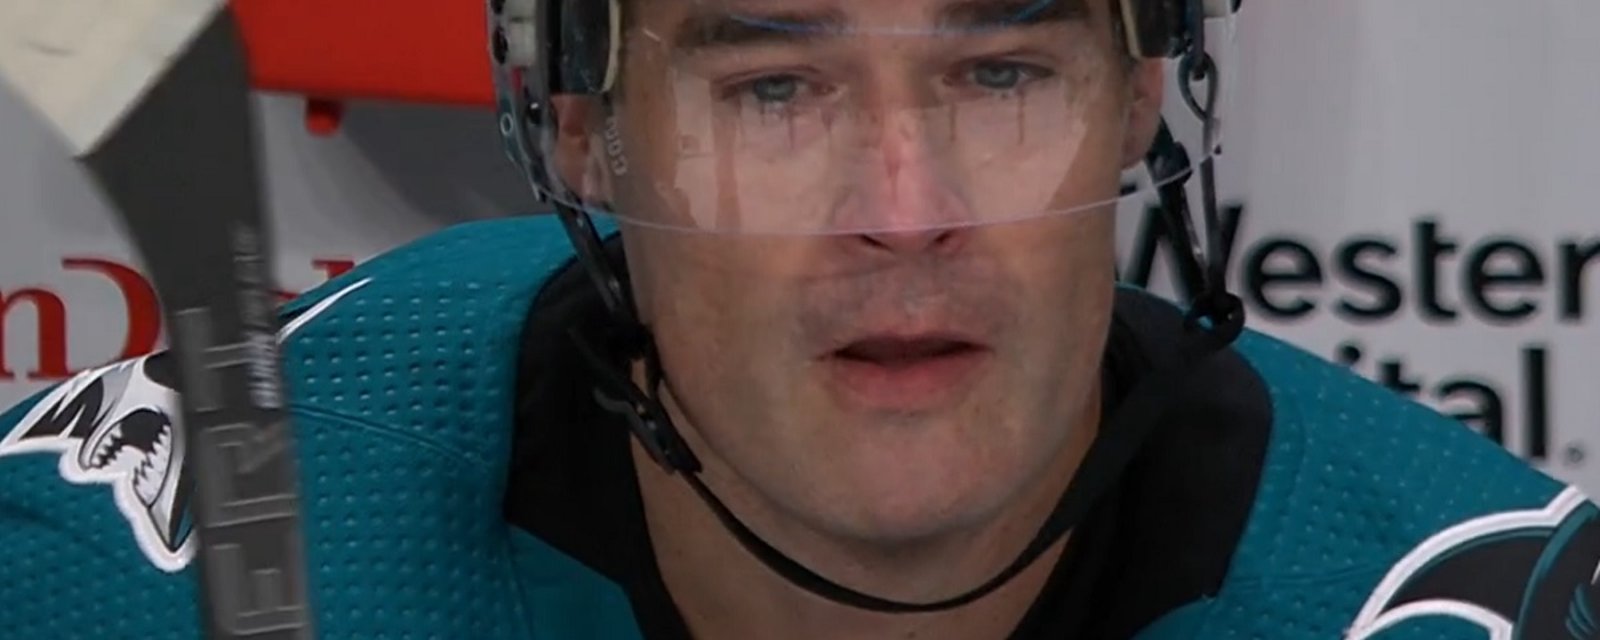 Patrick Marleau receives an incredible reception in his return to San Jose.